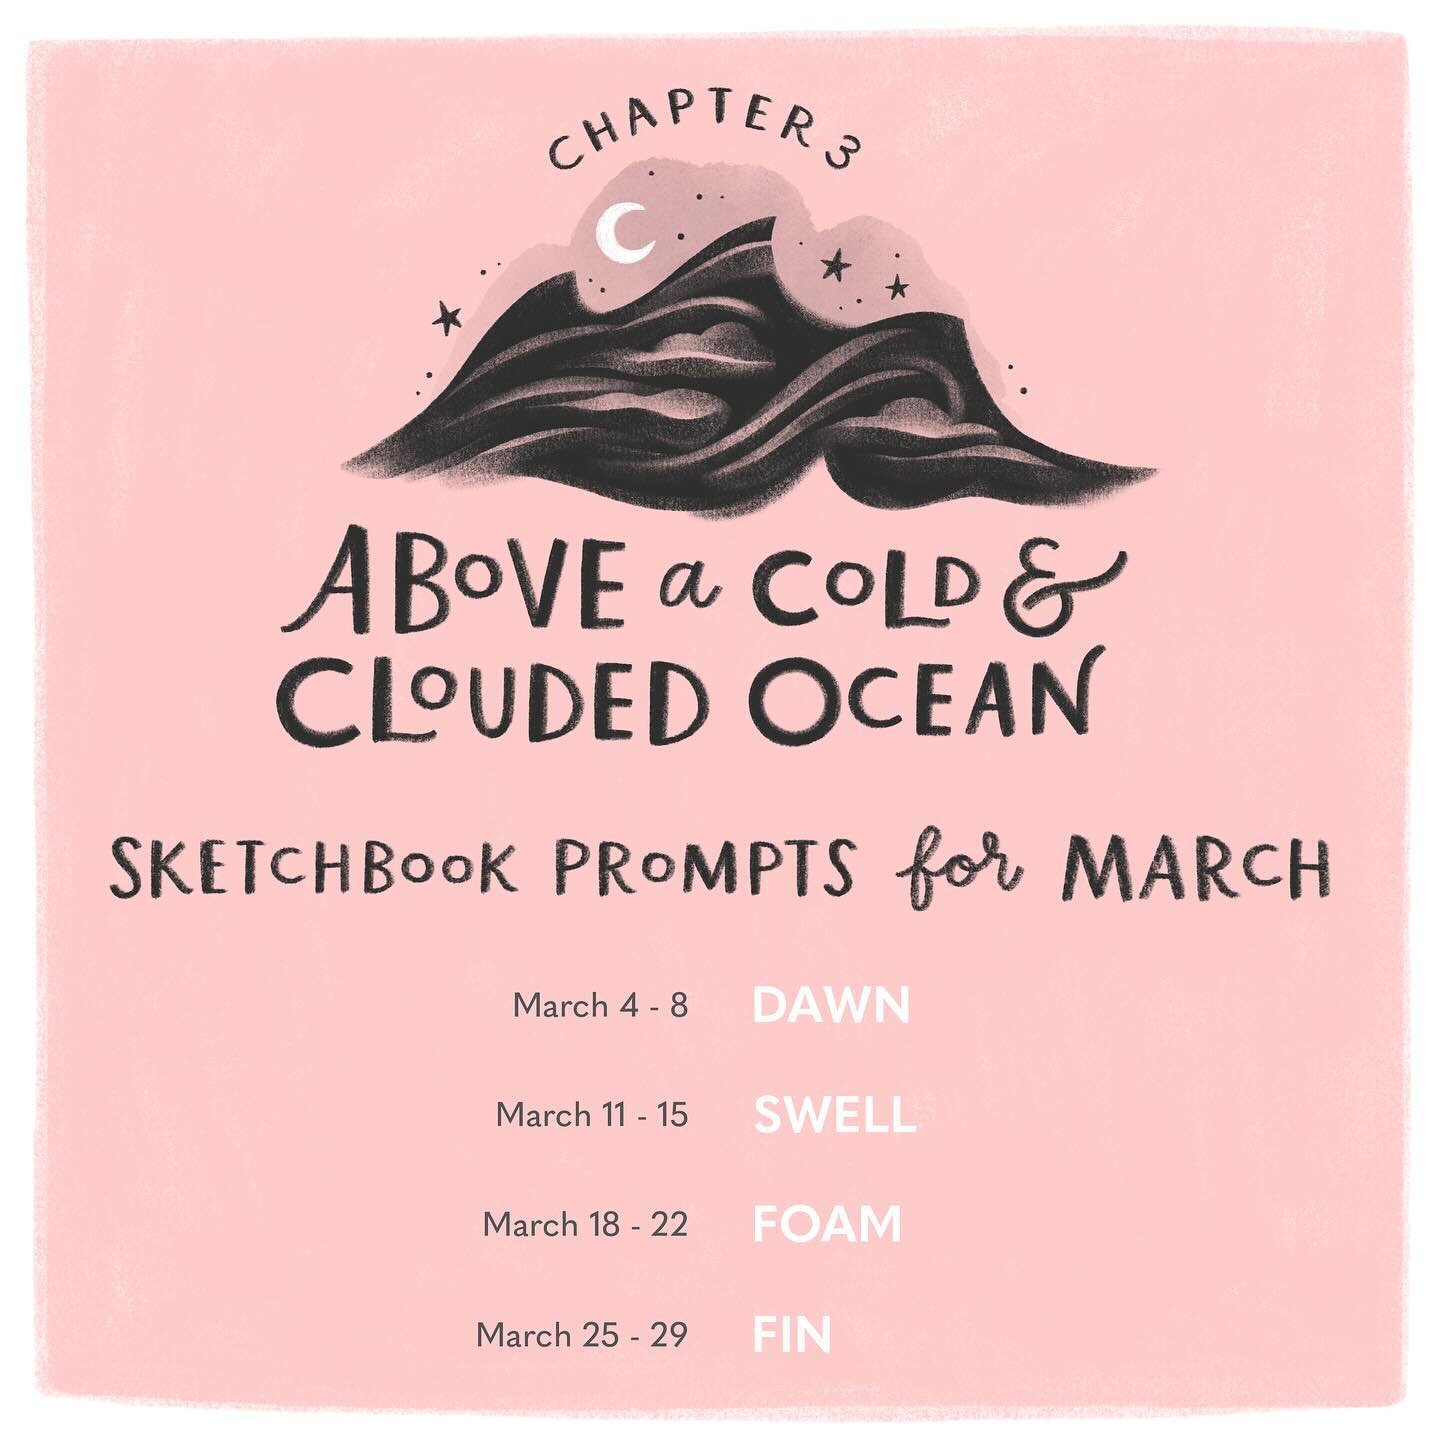 It&rsquo;s difficult to believe that March is upon us - but here we are! My gift to you is a new set of sketchbook prompts to help get us through the next couple weeks.
☾
Covid had me down and out for a couple weeks in February so I didn&rsquo;t log 